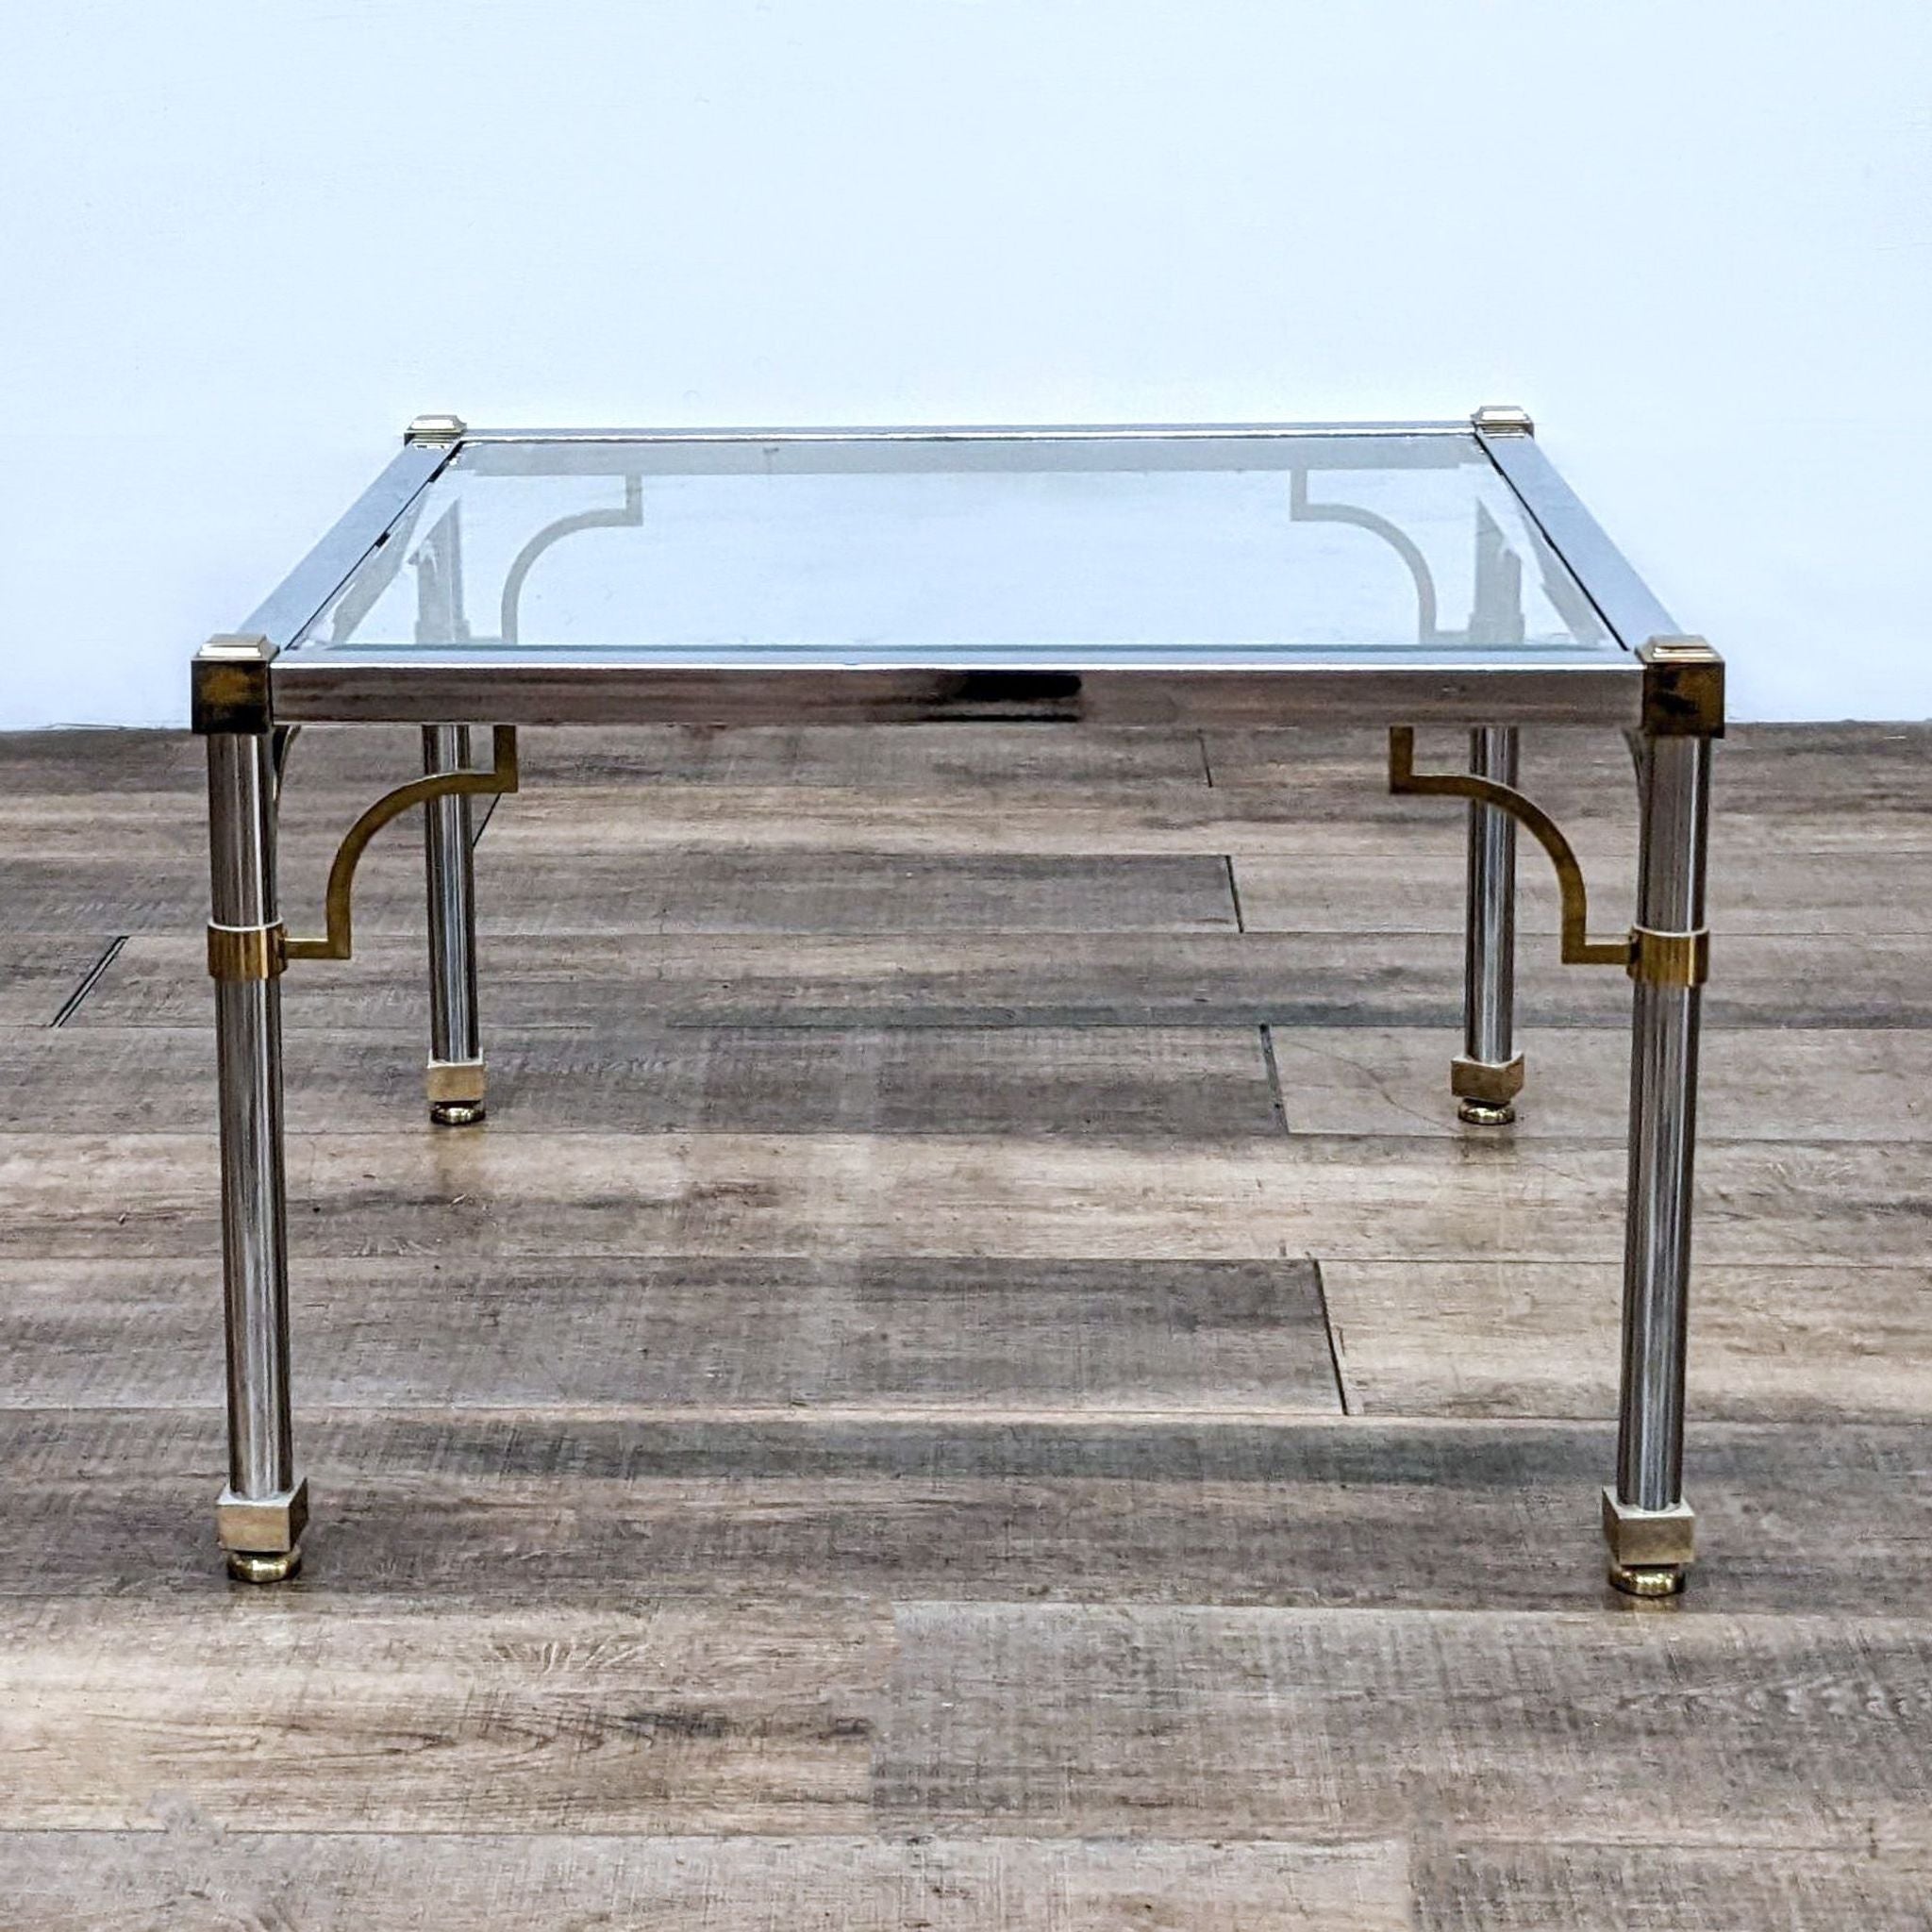 Reperch brand end table with a clear glass top and gold-tone metal legs on a wooden floor.